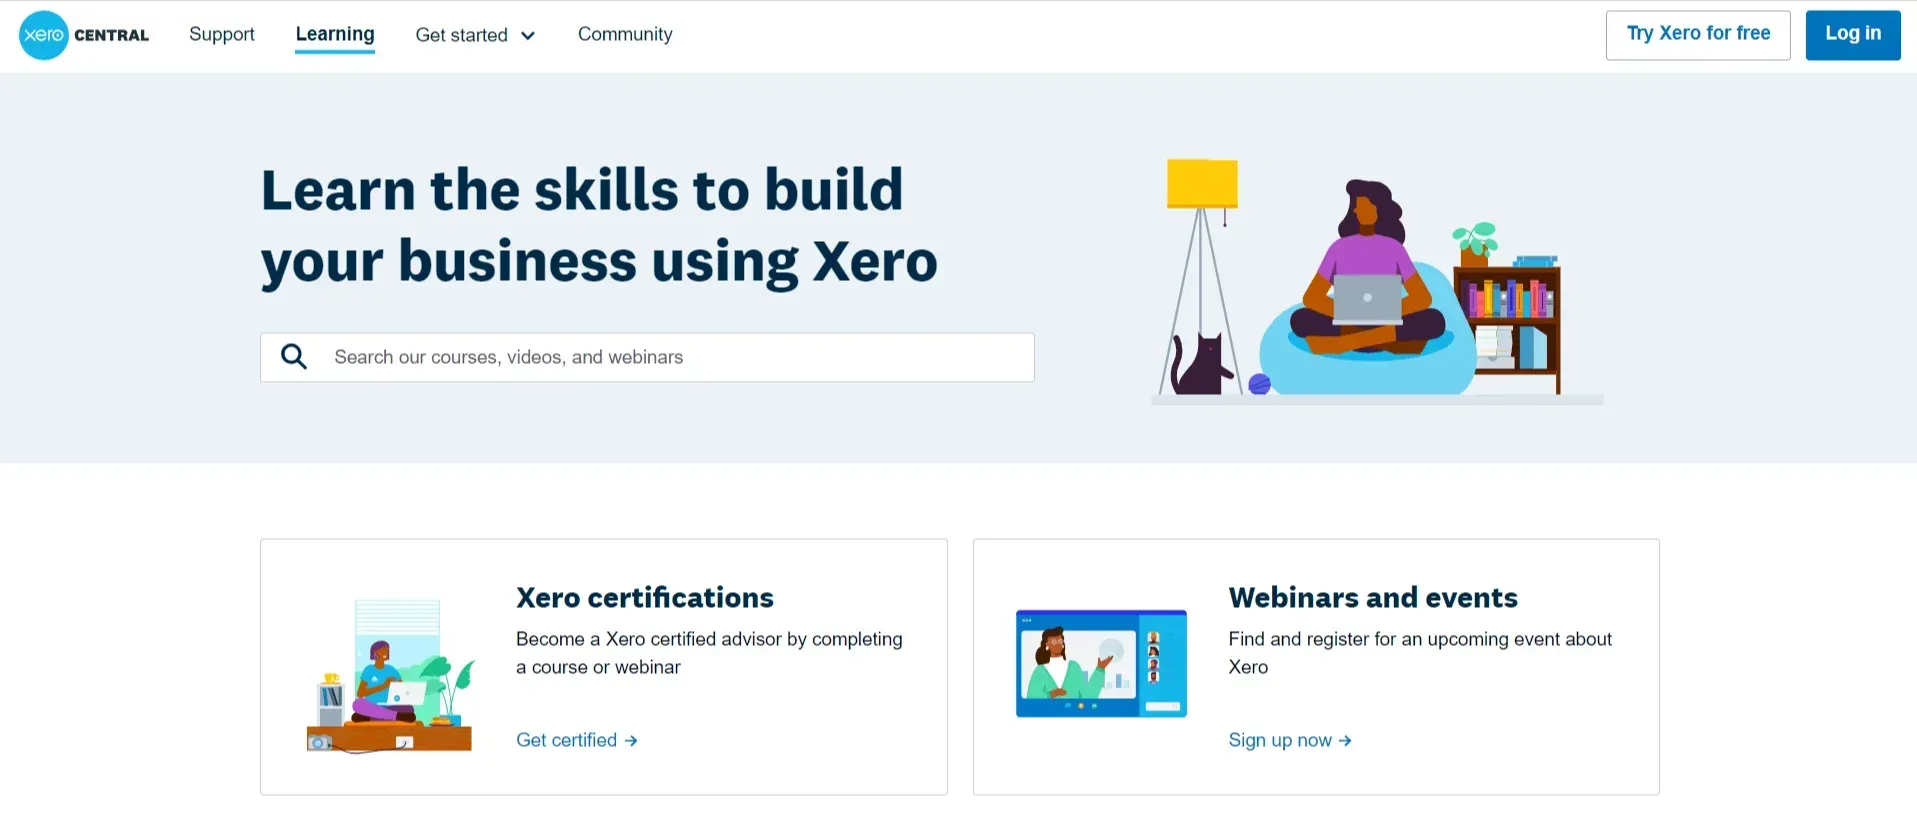 Self-Directed Learning vs. Structured Xero Training Courses